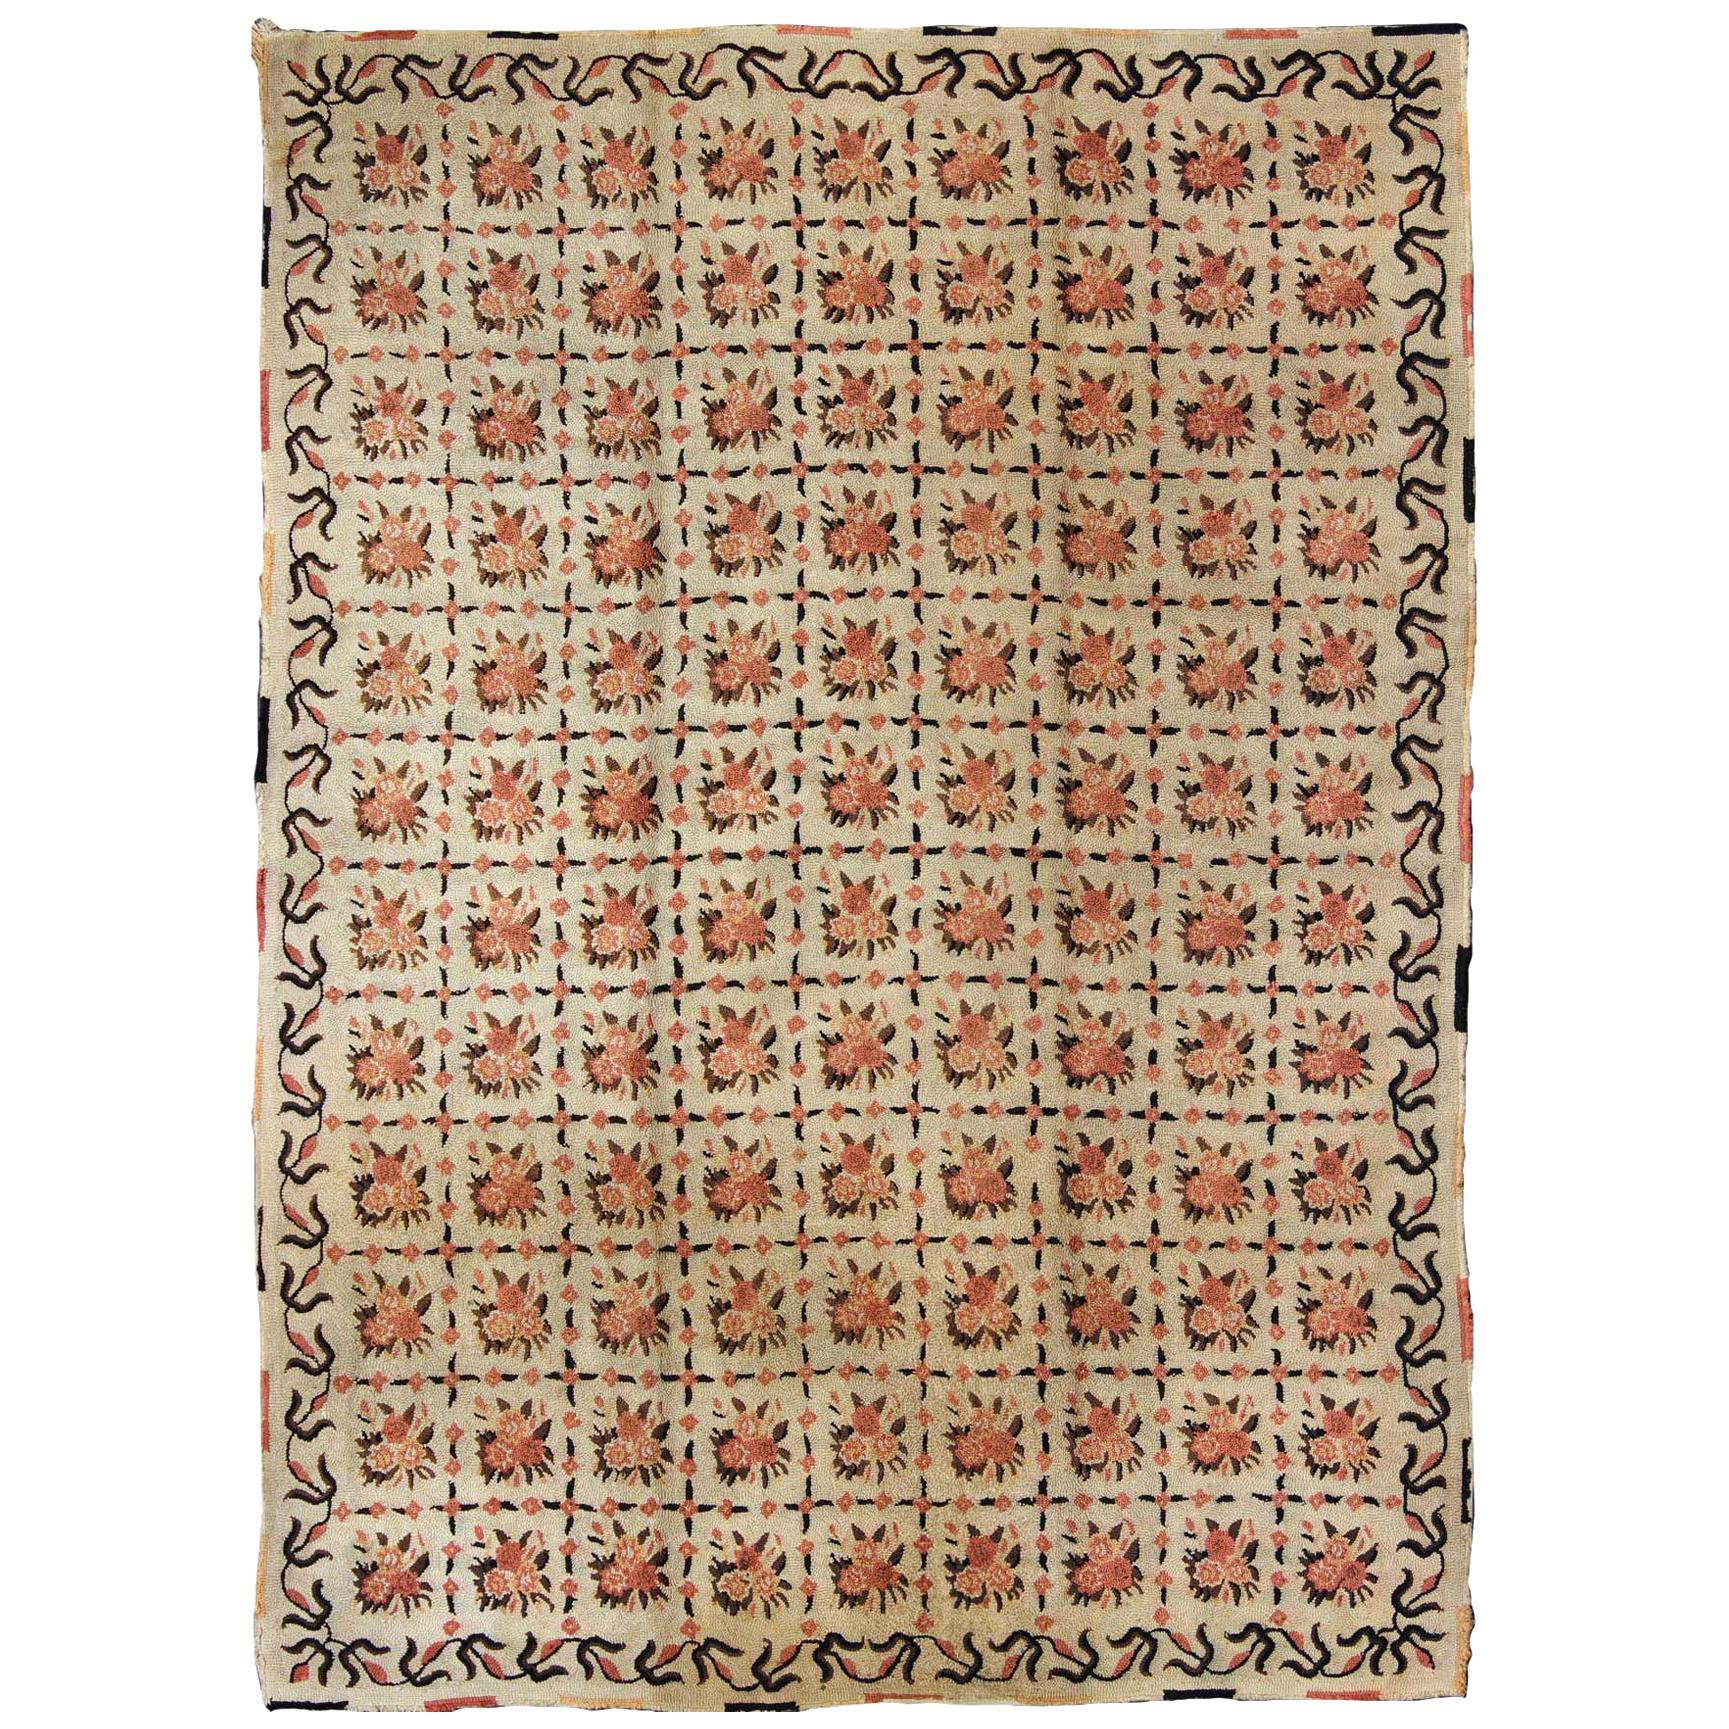 Vintage American Hooked Rug with All-Over Checkered Pattern of Floral Bouquets